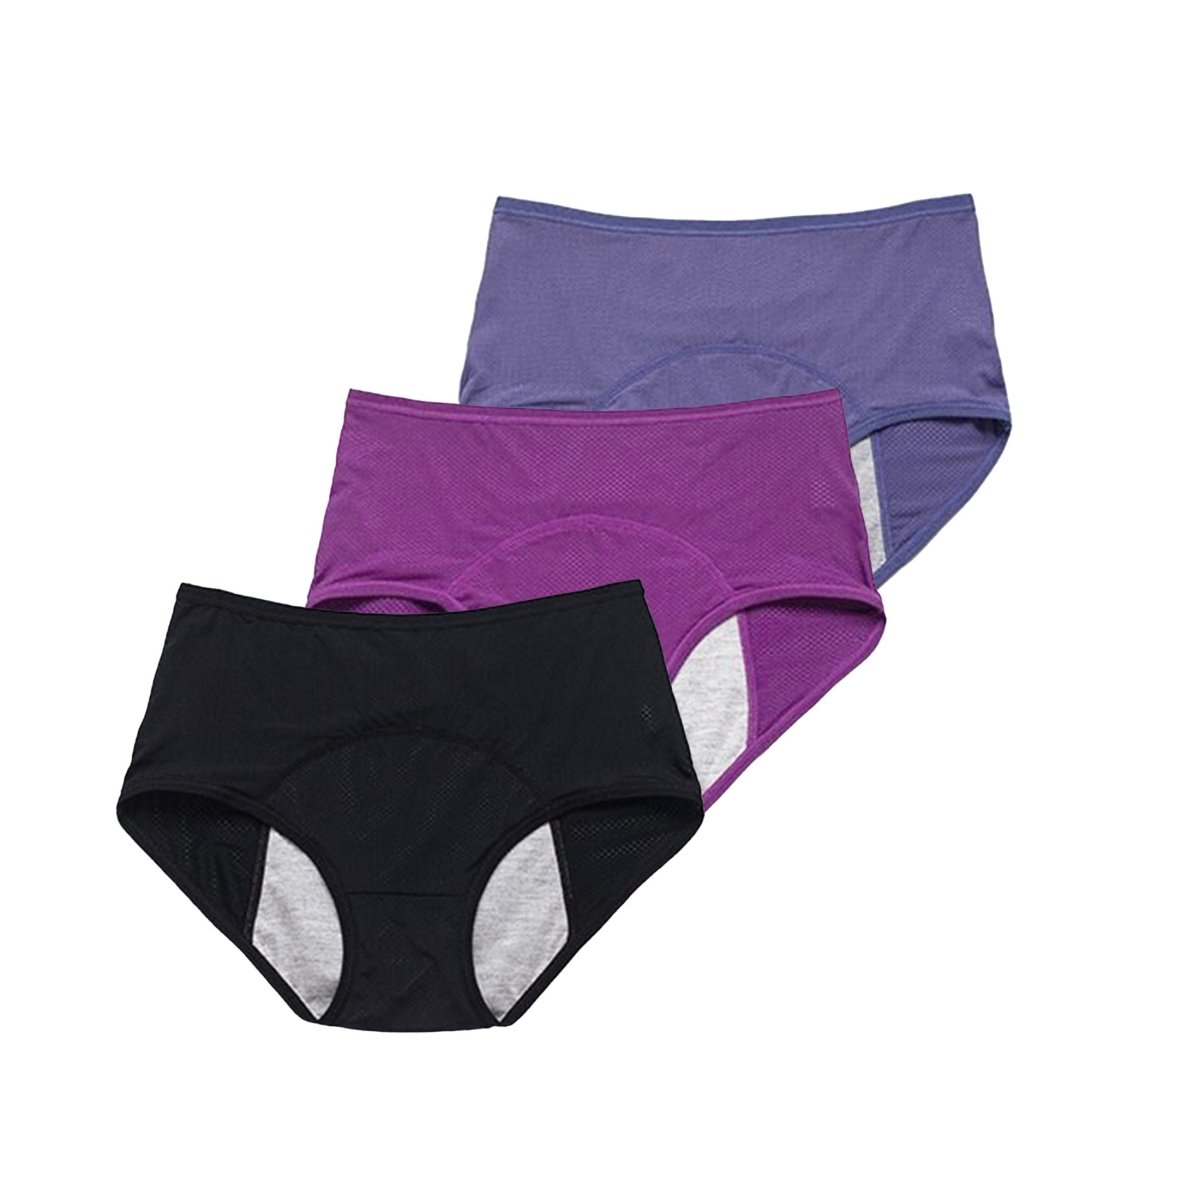 Leakproof Underwear | 3 Pack | Multiple Color Options | Everie Woman